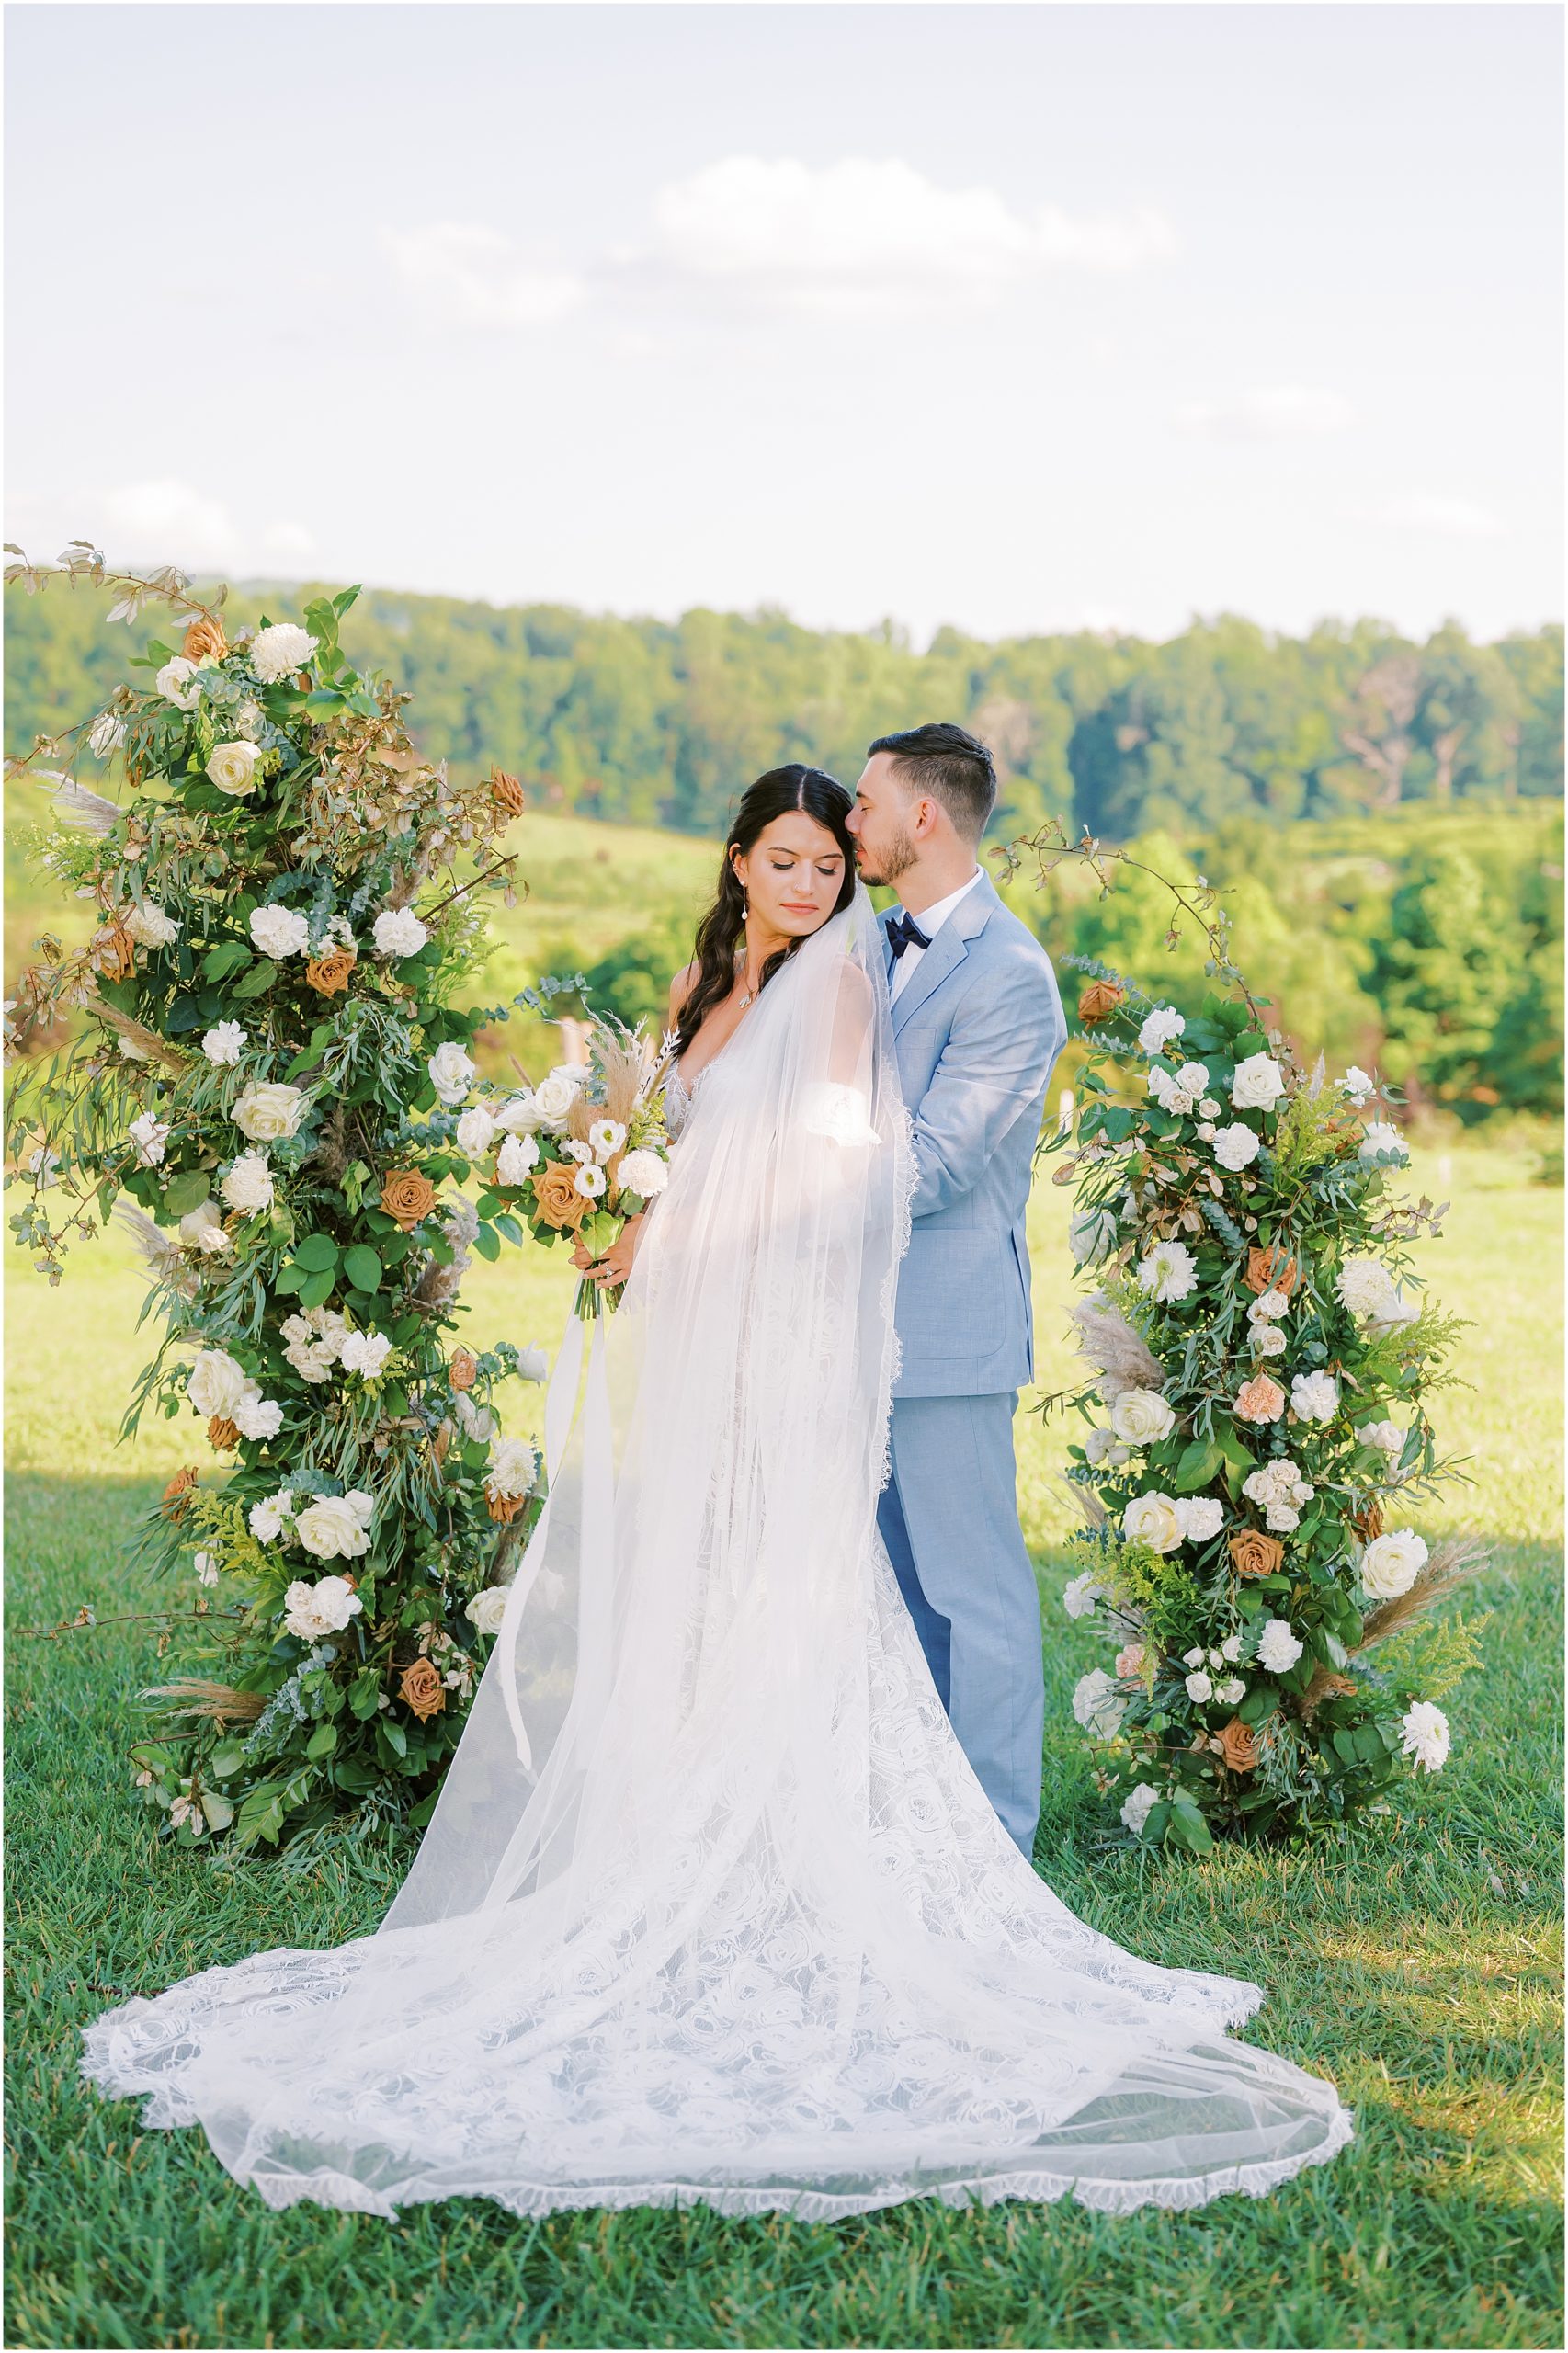 Newlywed portraits in front of summer floral arch